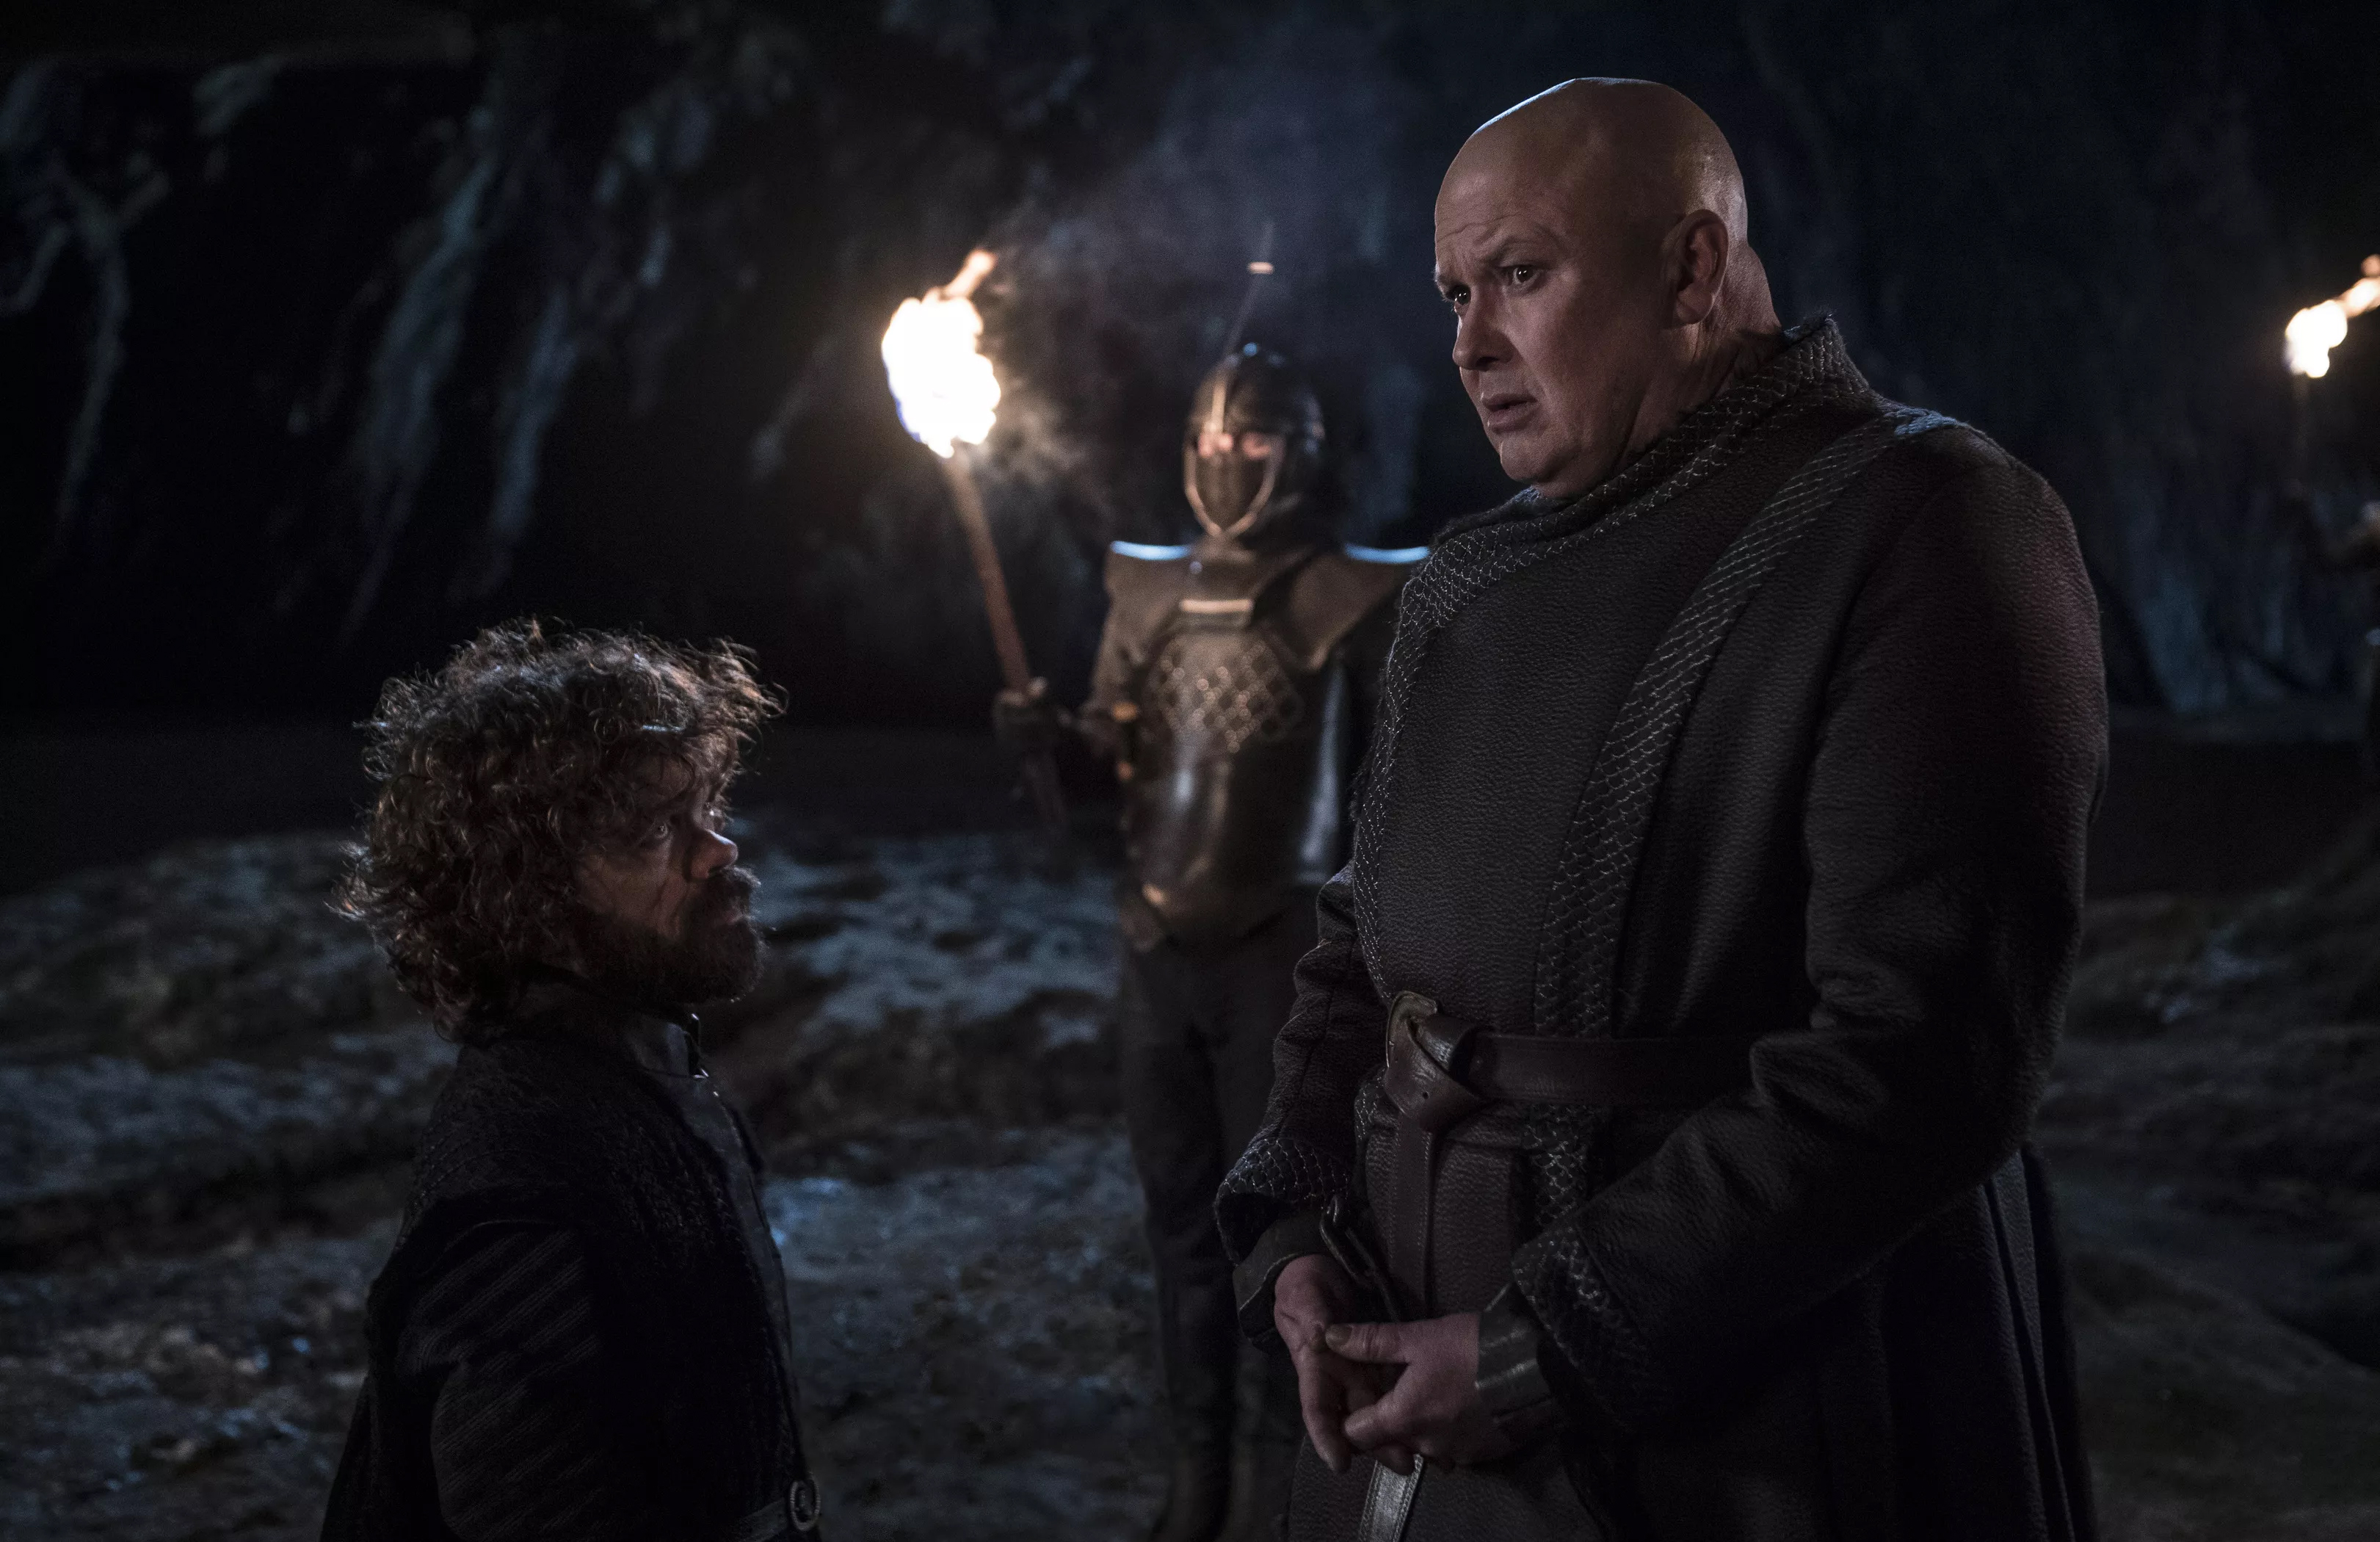 8x05 - The Bells - Tyrion and Varys